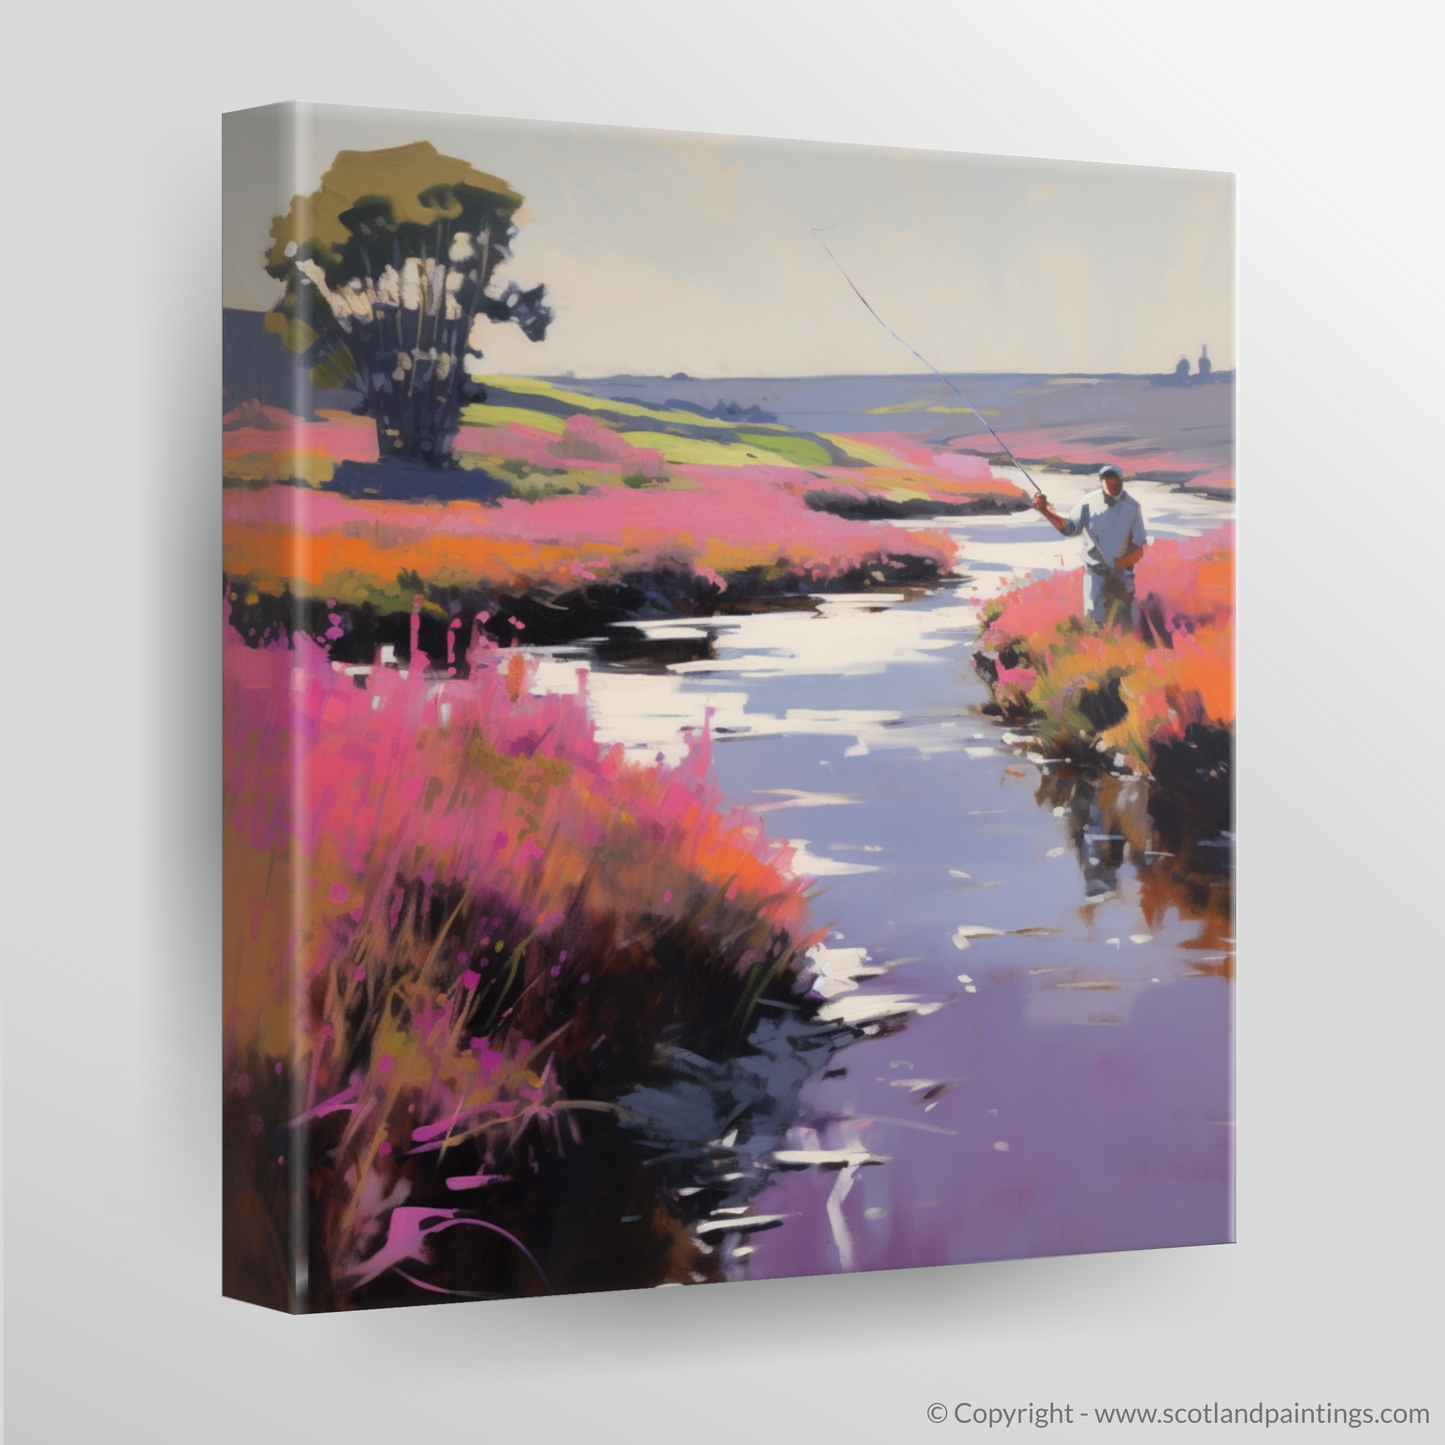 Heather Bloom by the River Conon: A Fly Fishing Reverie